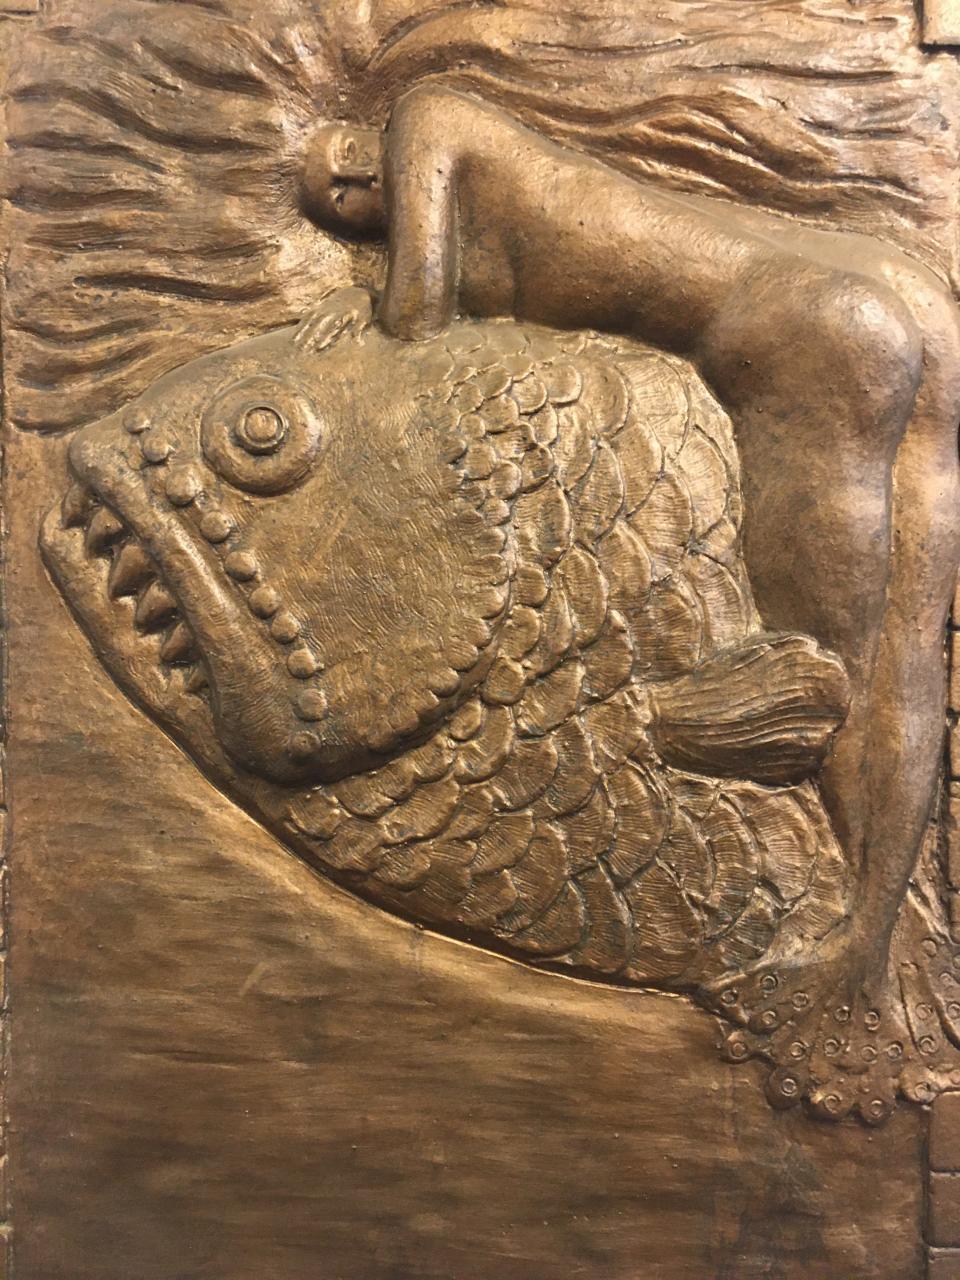 "Mermaid and Fish" (detail), by Len Shartle.